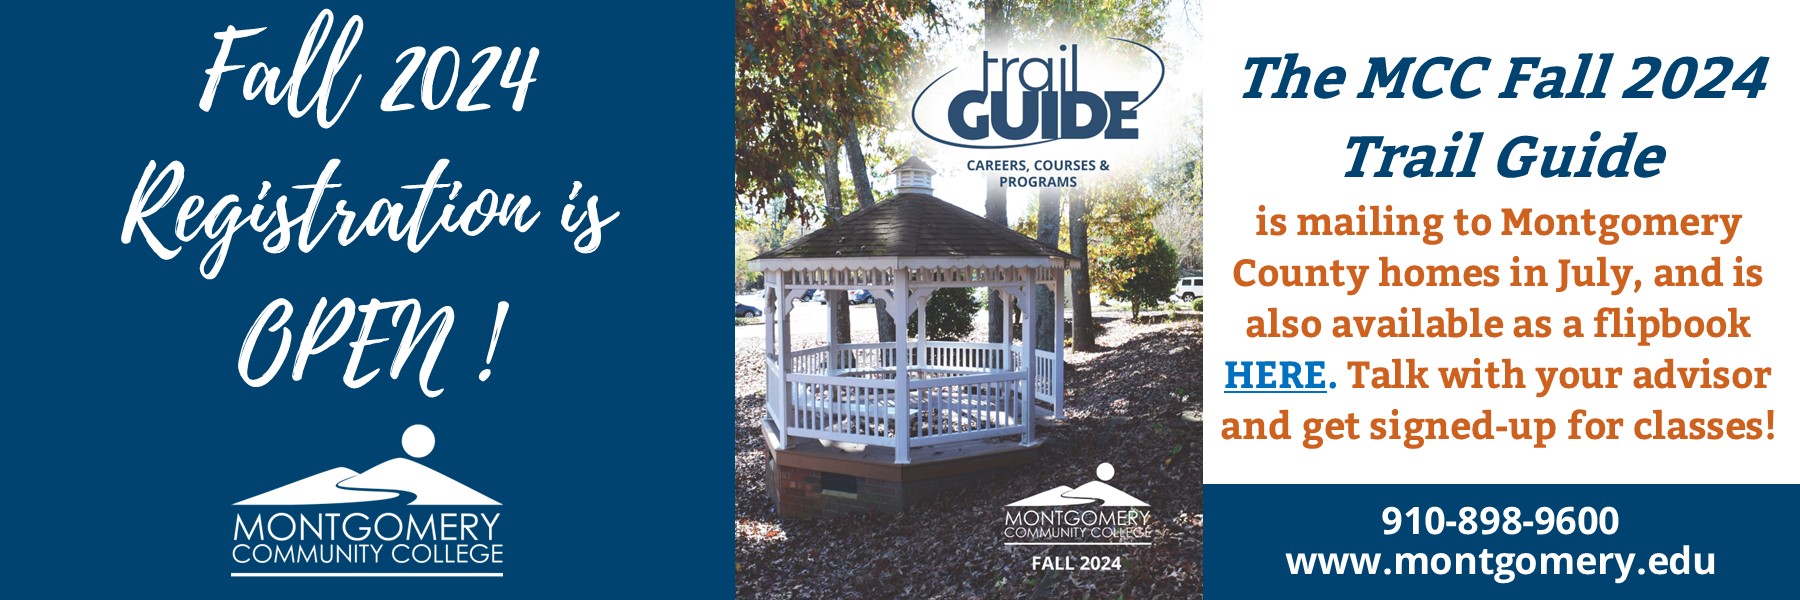 Fall 2024 Registration is Open! The MCC Fall 2024 Trail Guide is mailing to Montgomery County homes in July, and is also available as a flipbook HERE. Talk with your advisor and get signed-up for classes! 910-898-9600 www.montgomery.edu